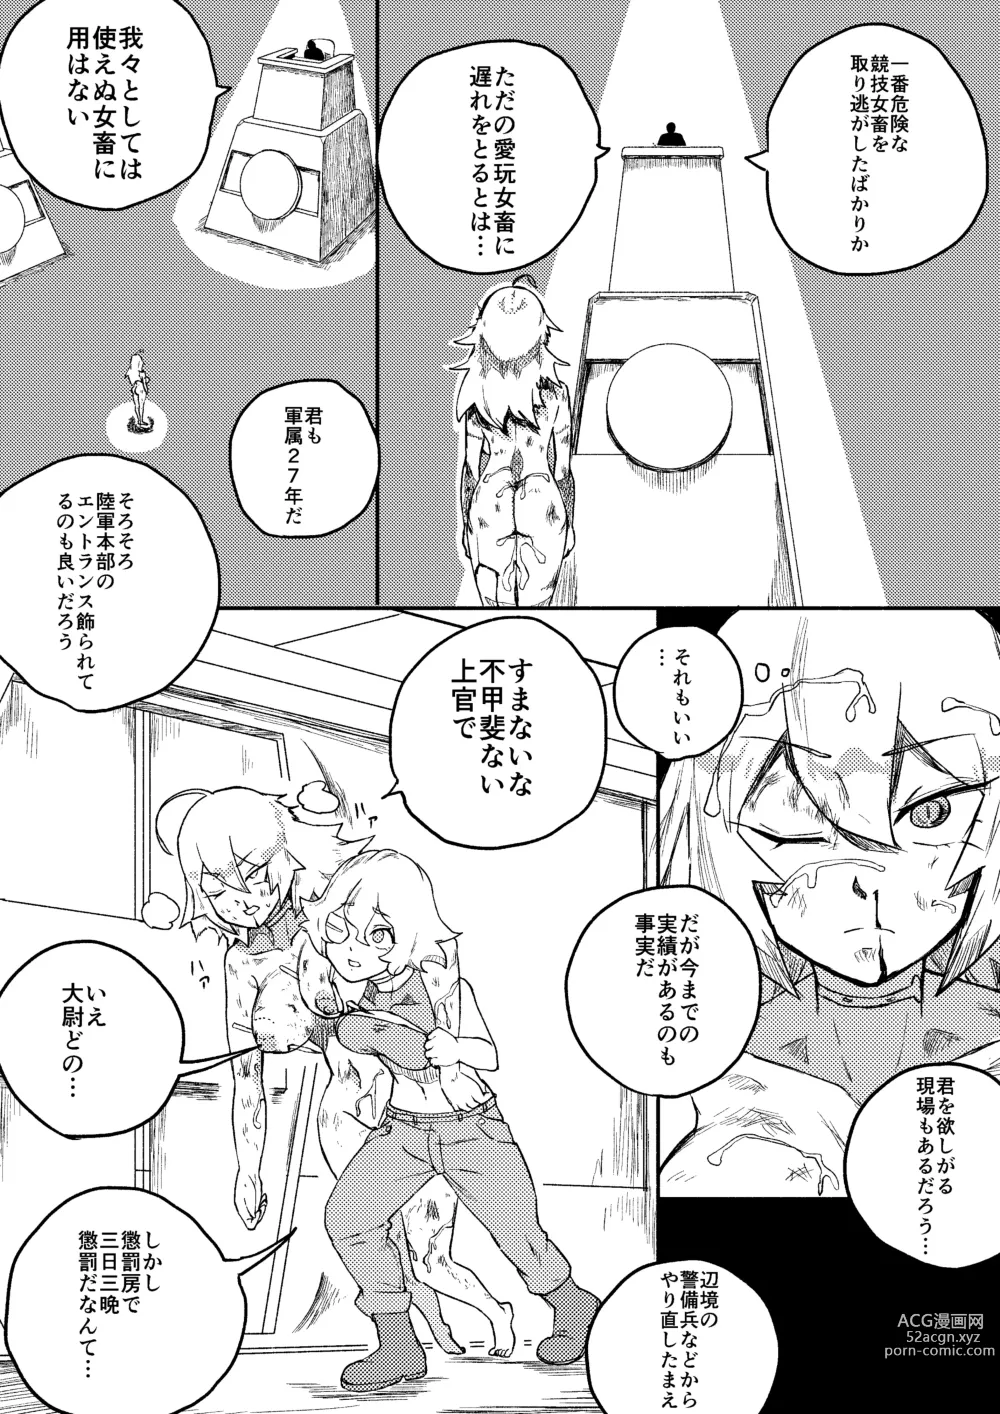 Page 20 of doujinshi Red Tag Episode 7 Part 2